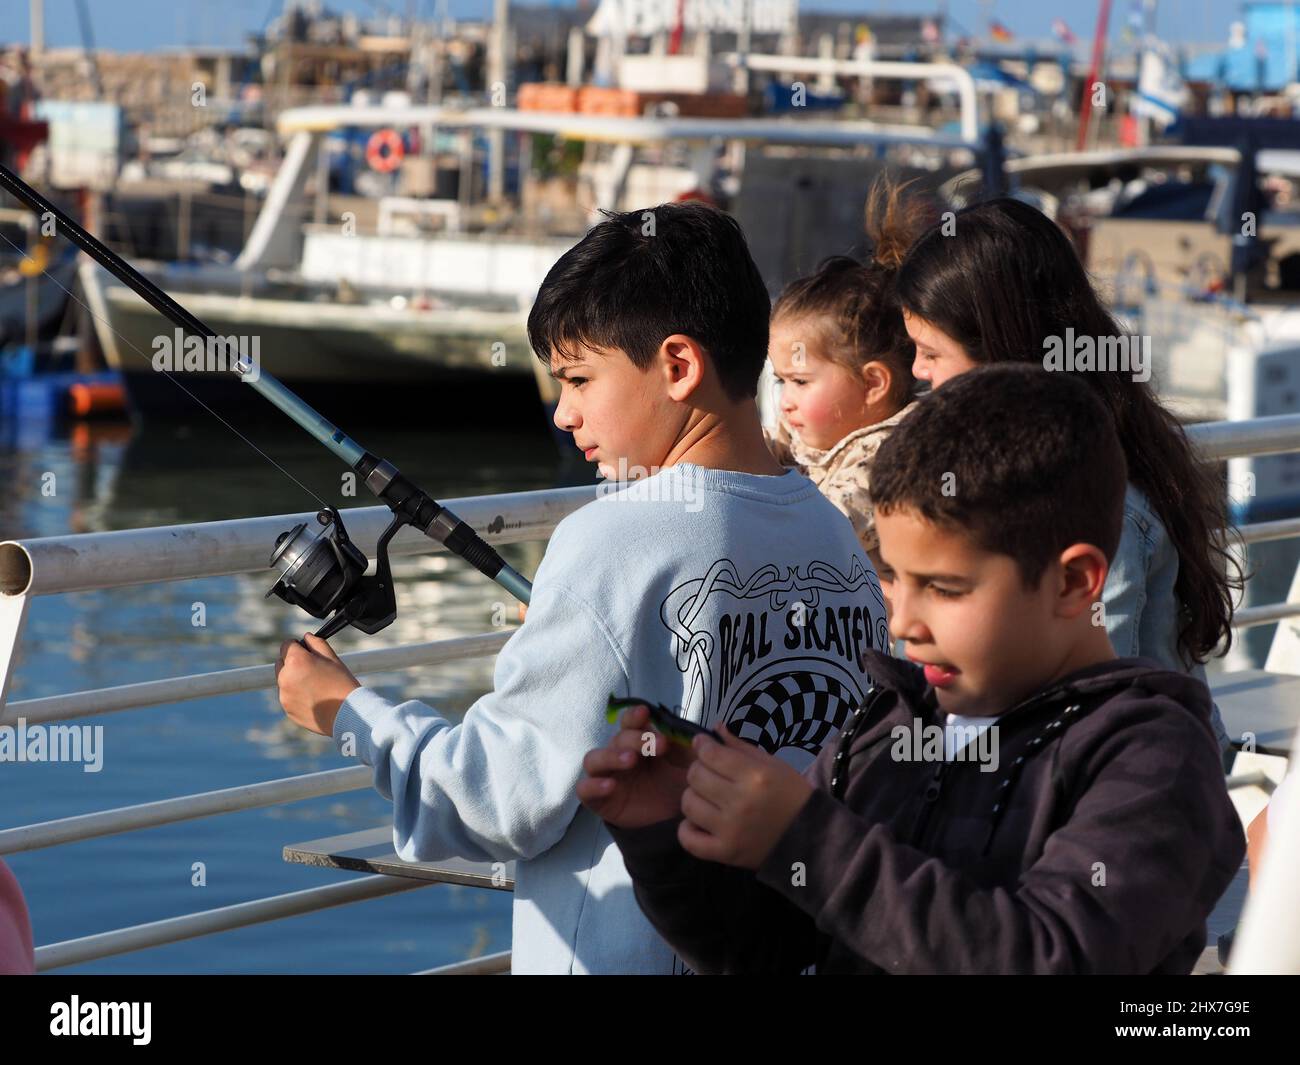 ASHKELON, ISRAEL - MARCH 04, 2022: Children go fishing in the port of Ashkelon. Focus on the boy with the fishing rod. Blurred background. Stock Photo